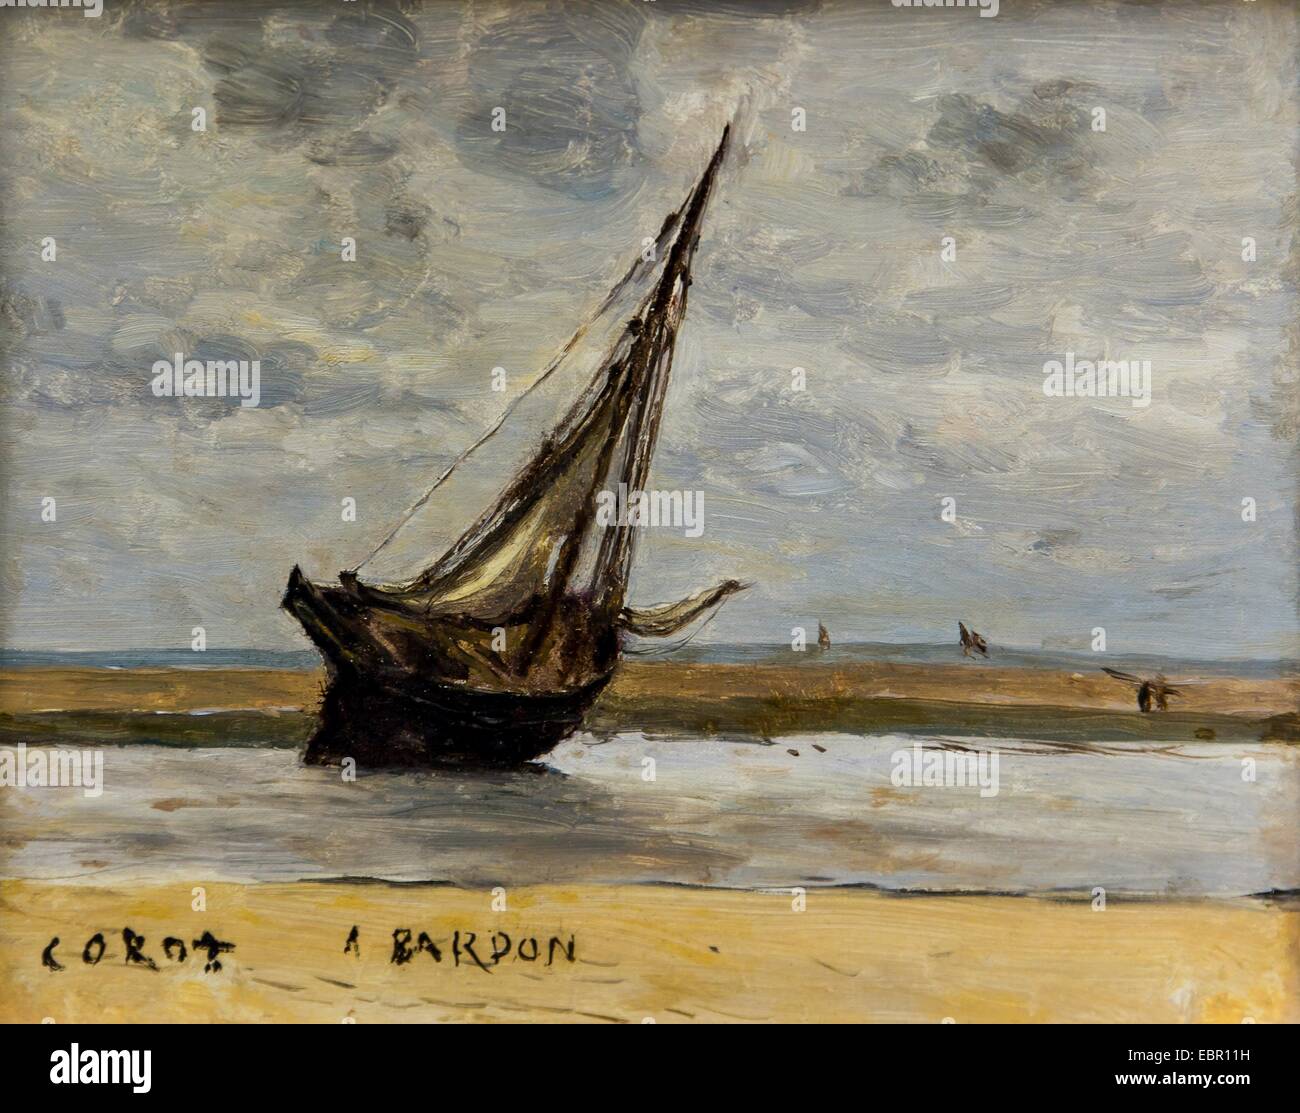 ActiveMuseum 0001646.jpg / Trouville. Boat aground aka Fishing boat at low tide. circa 1840 - Camille Corot Oil on canvas 25/09/2013  -   / 19th century Collection / Active Museum Stock Photo